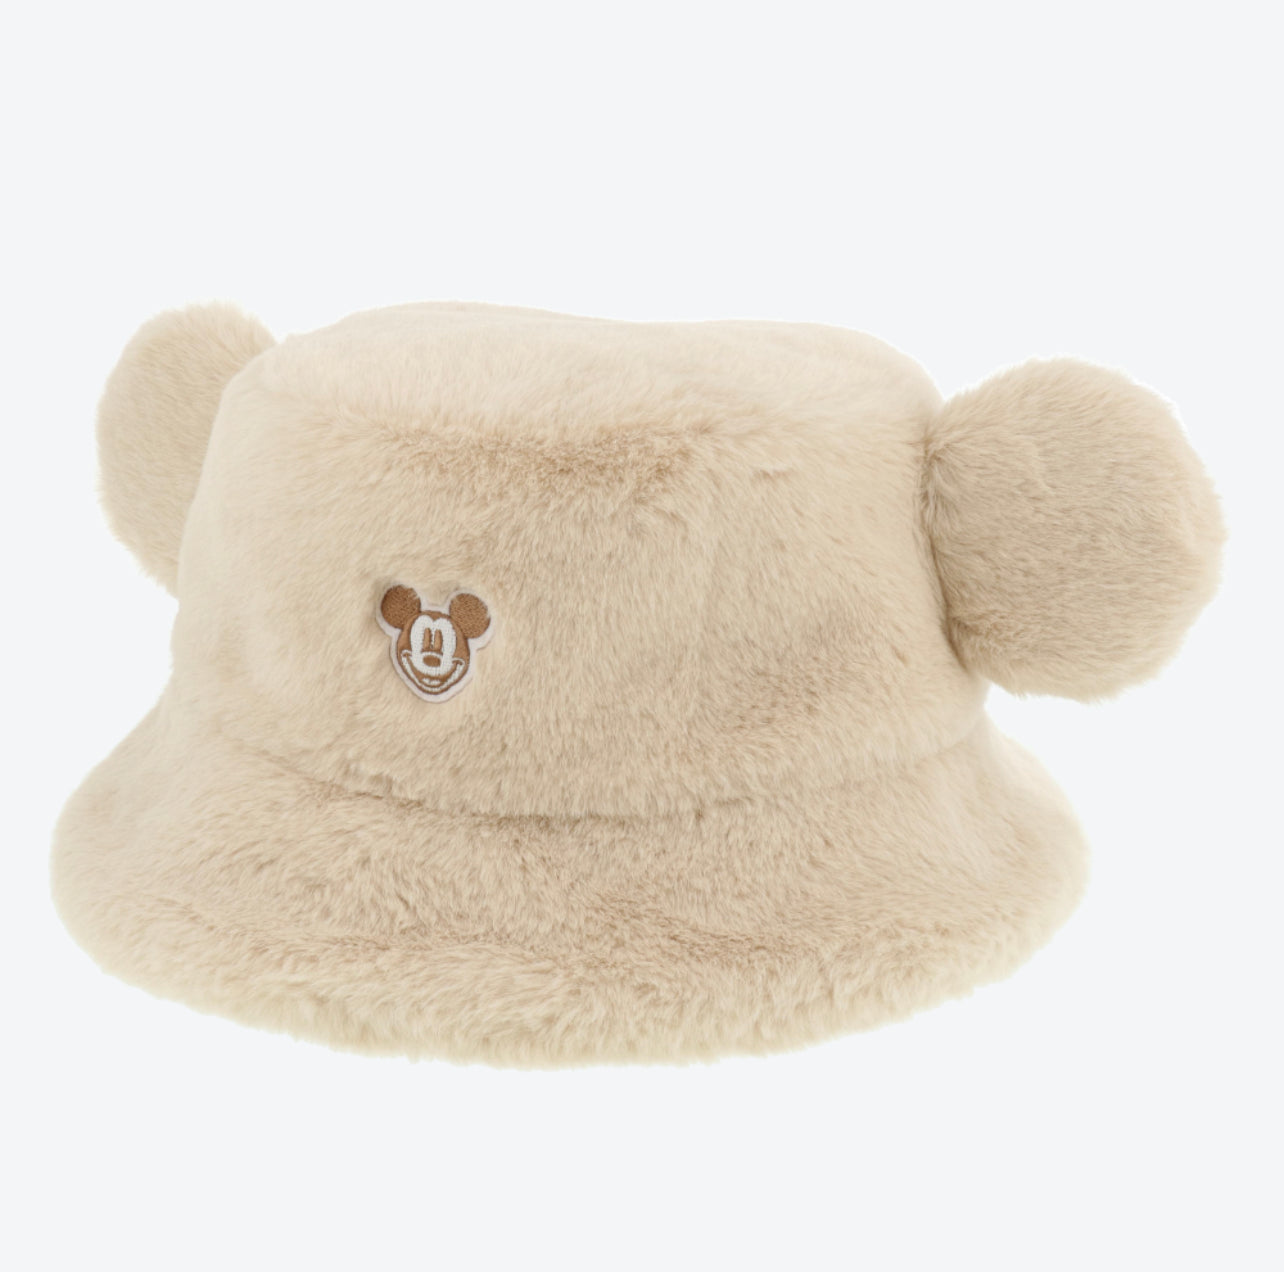 TDR - Fluffy Fluffy Warm Goods x Fluffy Boa Mickey Mouse Bucket Hat with  Ear (Color: Beige) (Release Date: Oct 26)